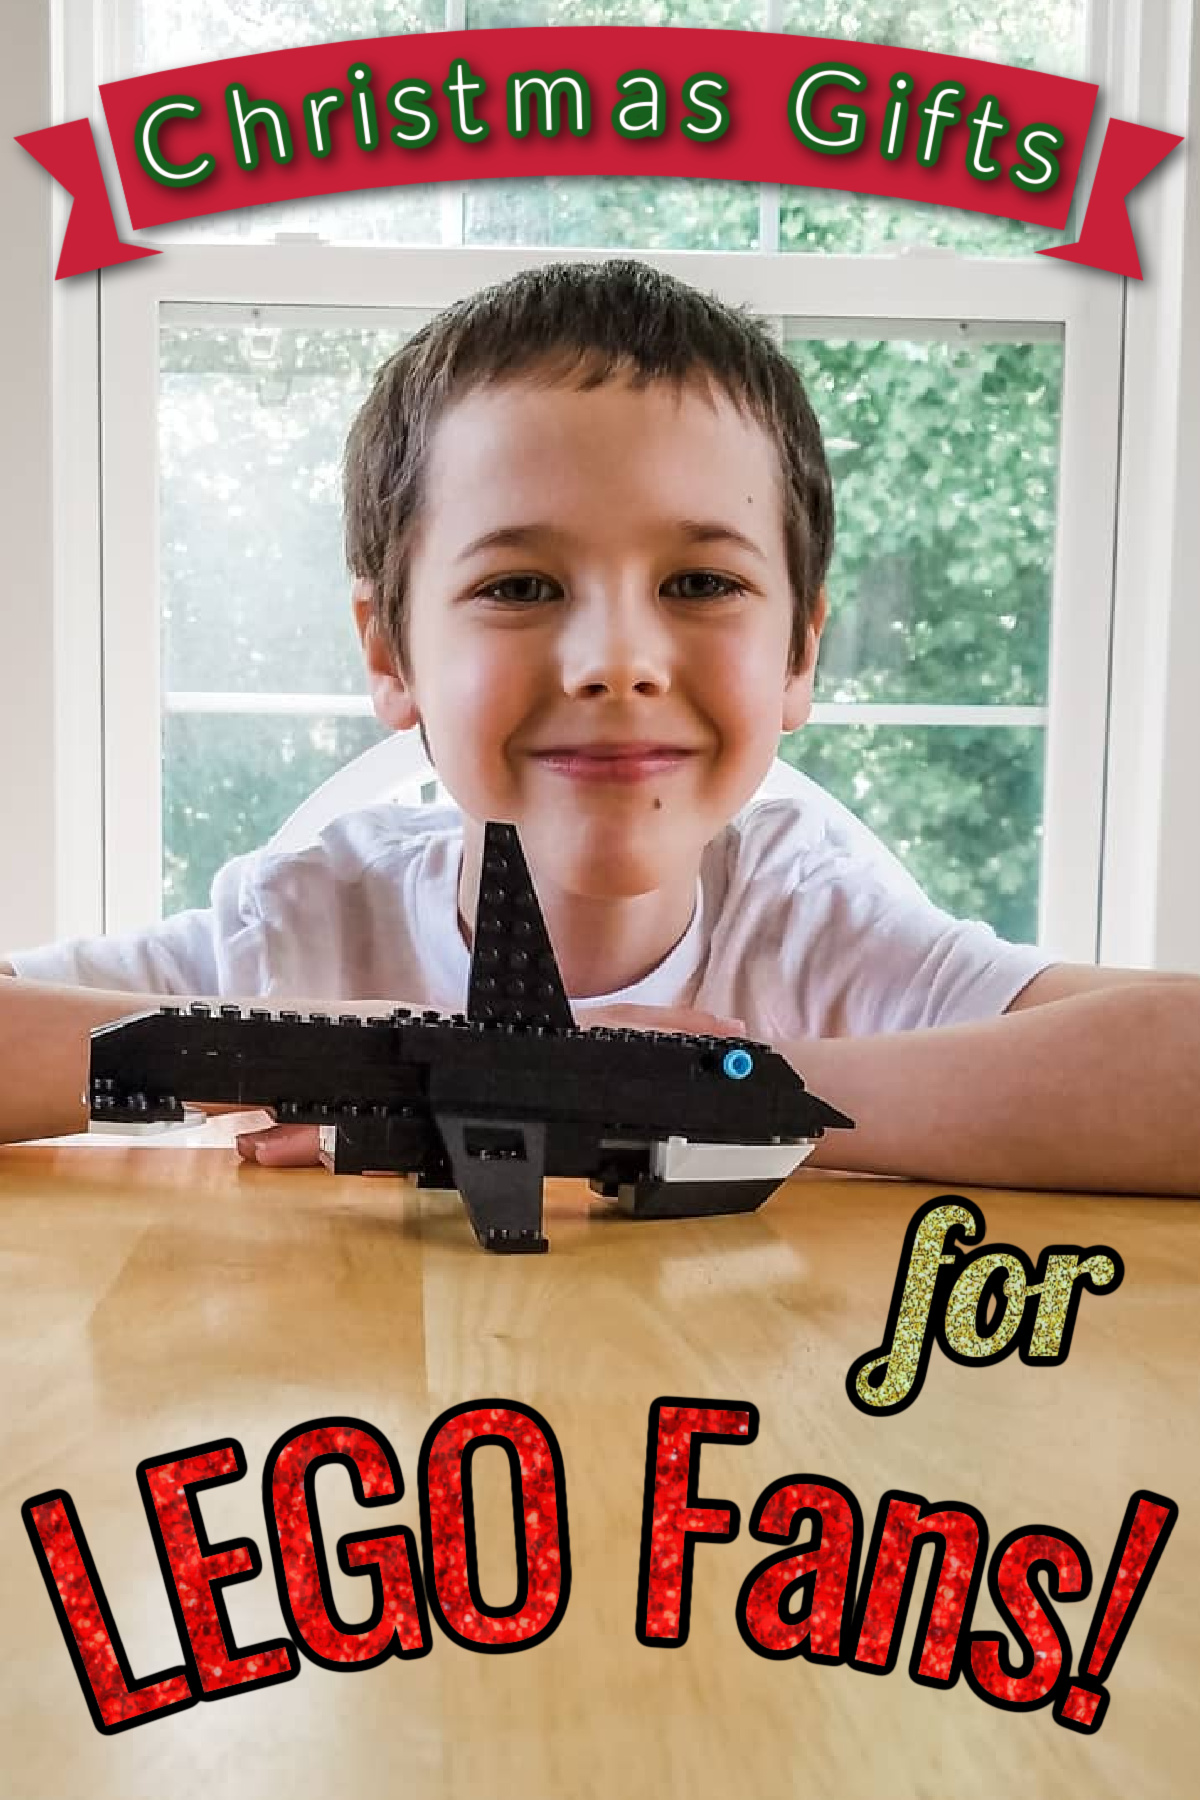 Boy with an Orca LEGO with a text overlay that says "Christmas Gifts for LEGO Fans"